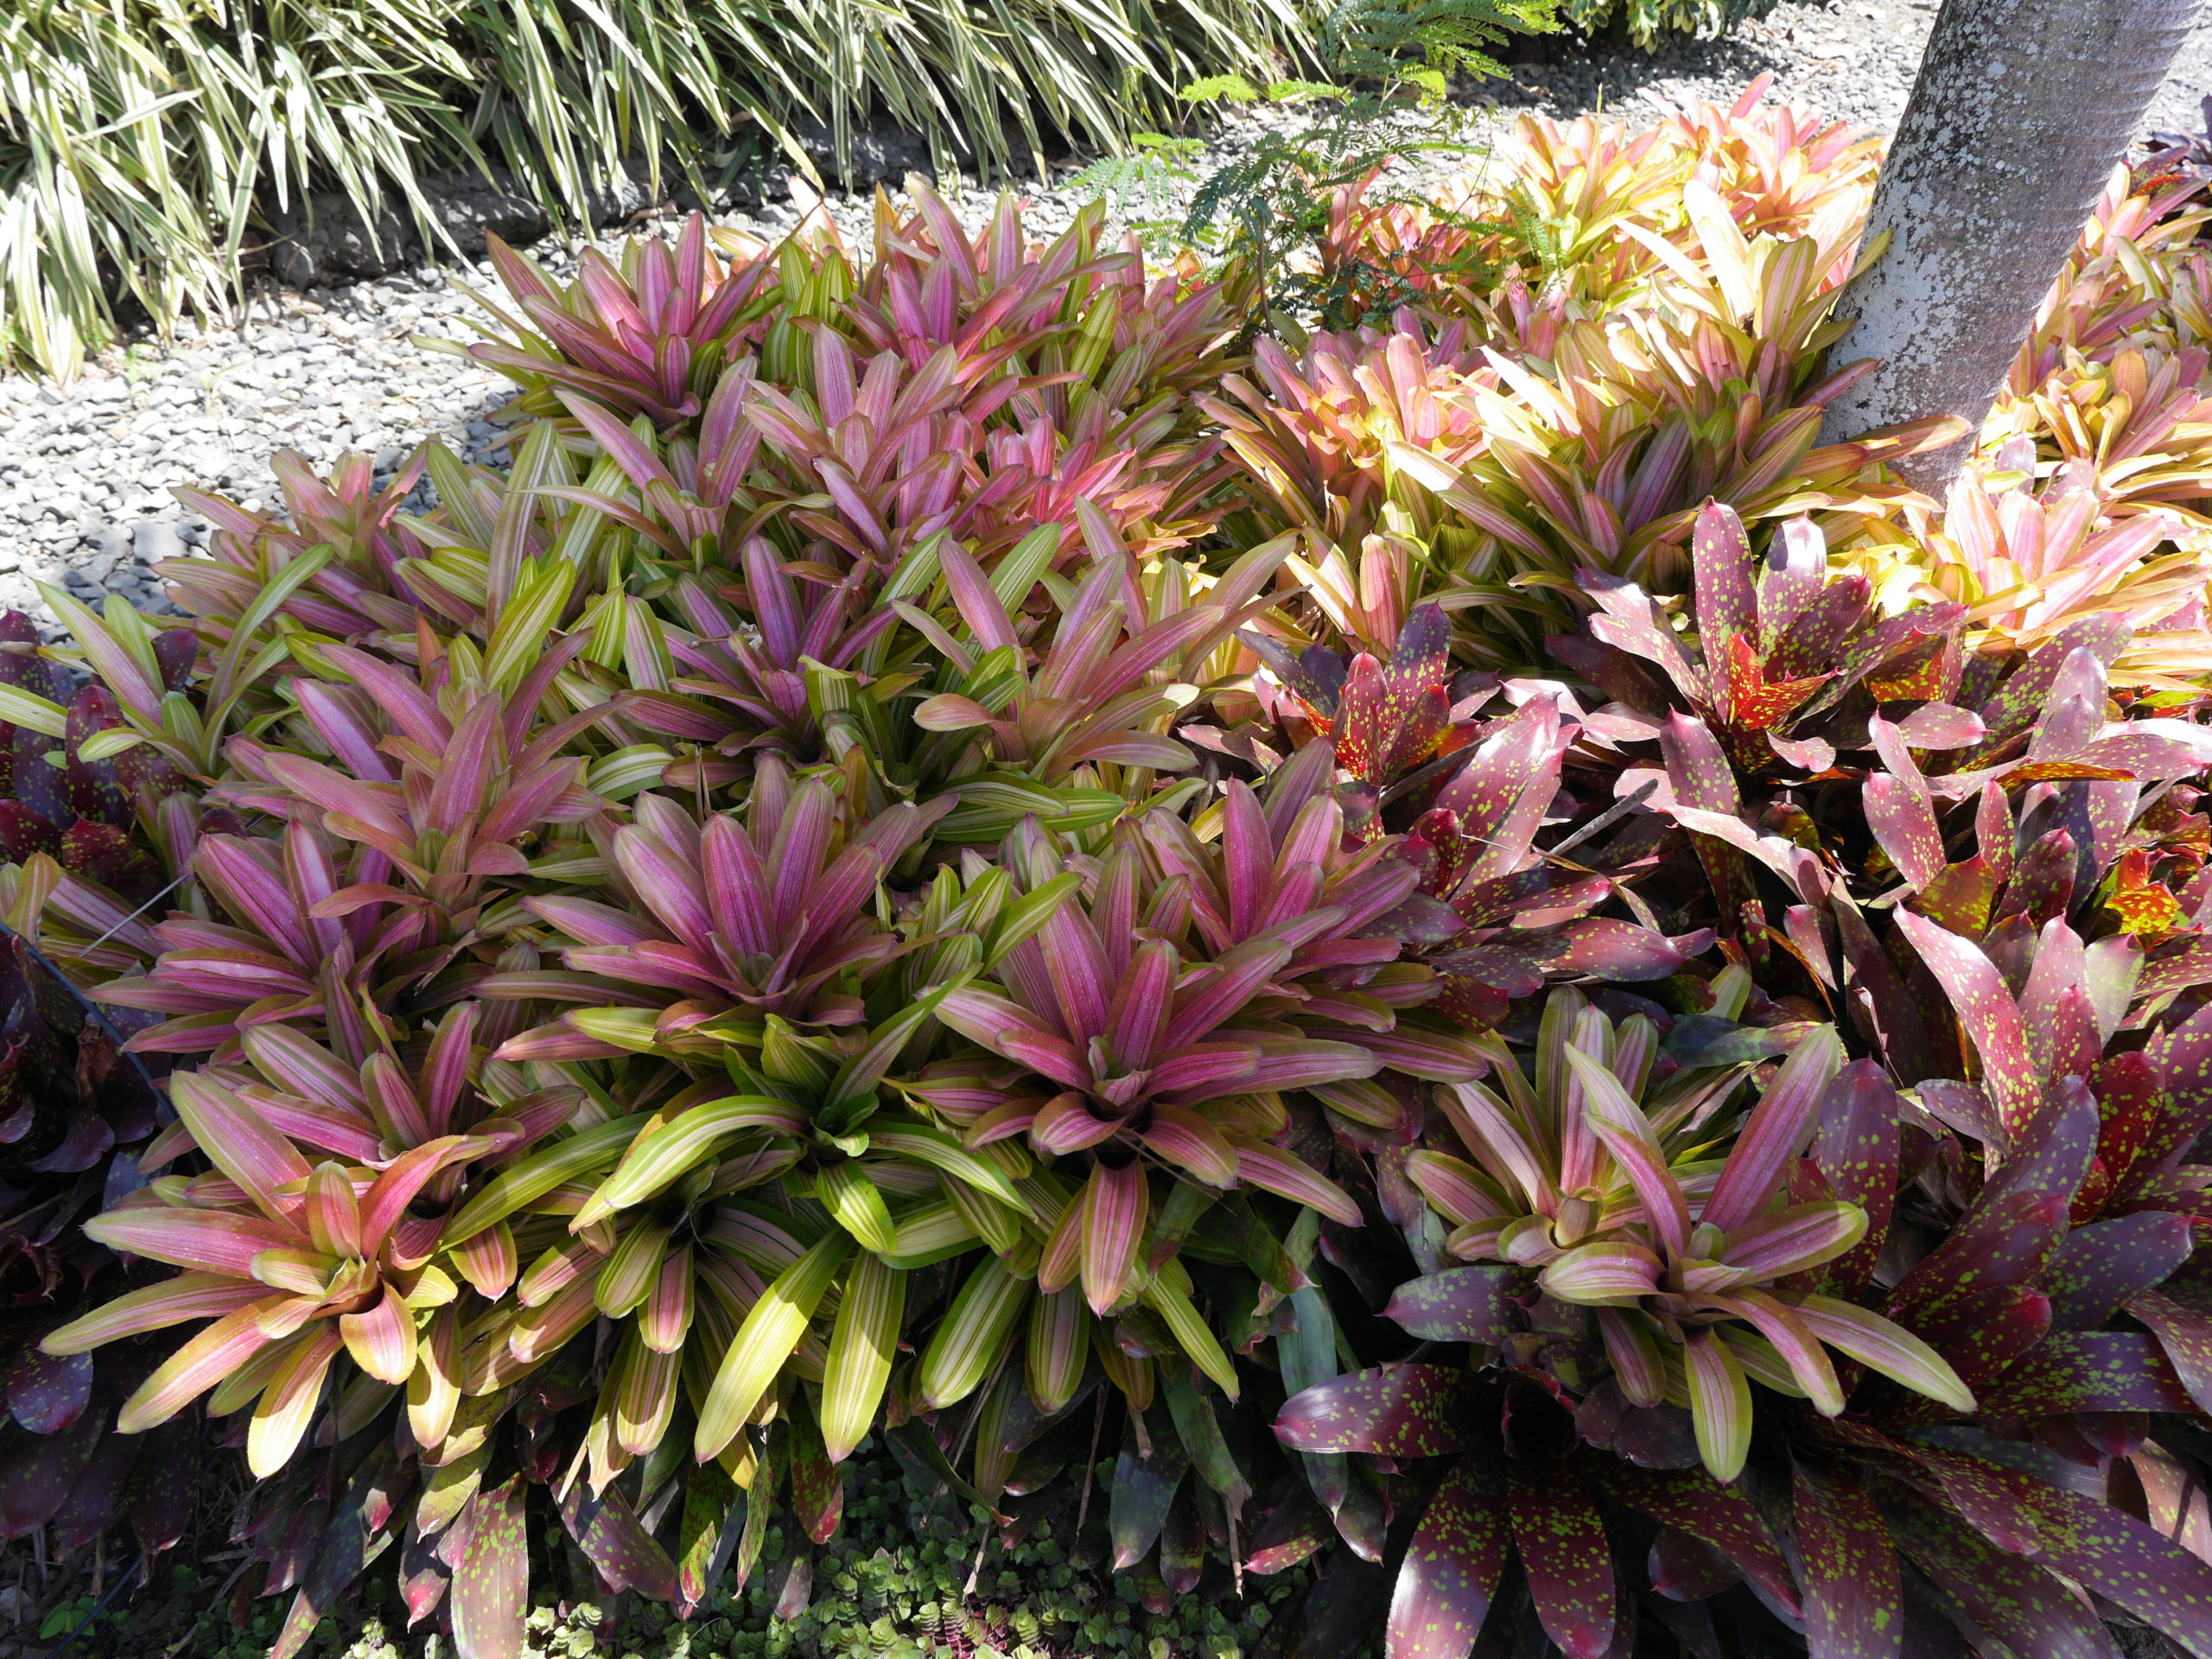 Often used in tropical landscapes and indoor plantscapes, these Bromeliads are showing their colorful foliage bracts but they are not in flower. Even at this stage, they still make attractive houseplants that are very easy to grow.